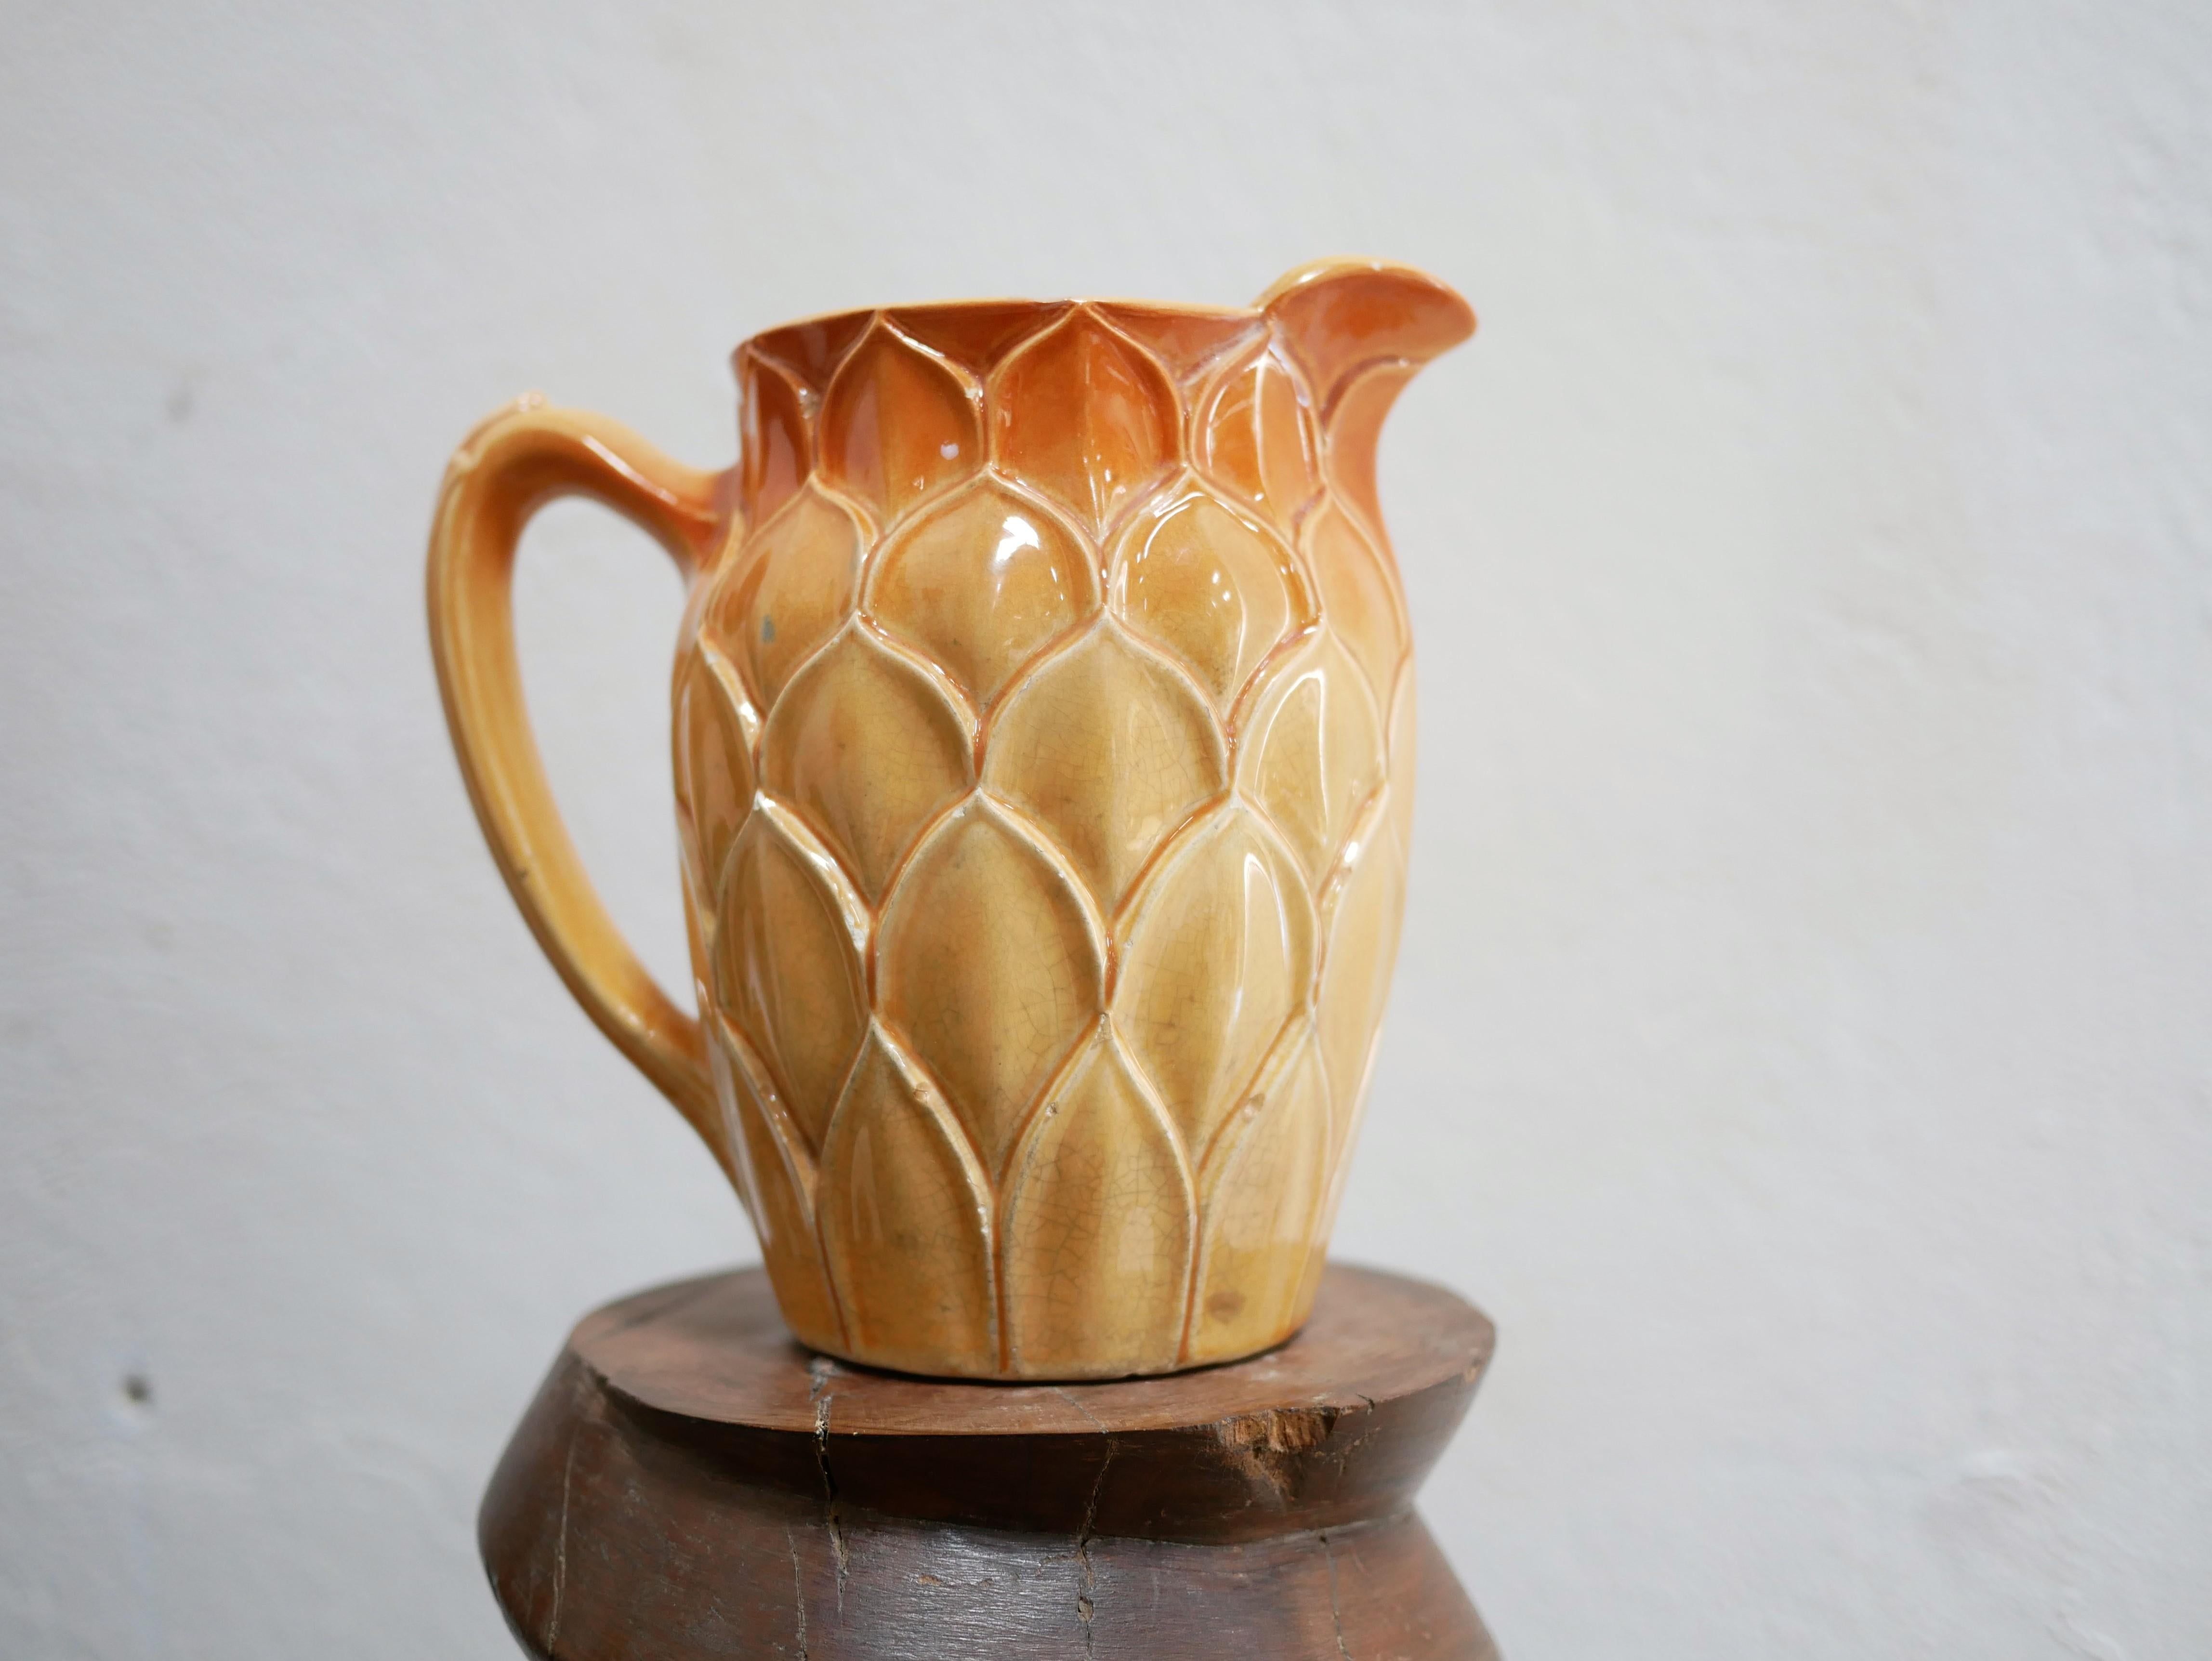 Slip pitcher designed by the Saint Clément factory in the 1930s.

Trendy and current, this 